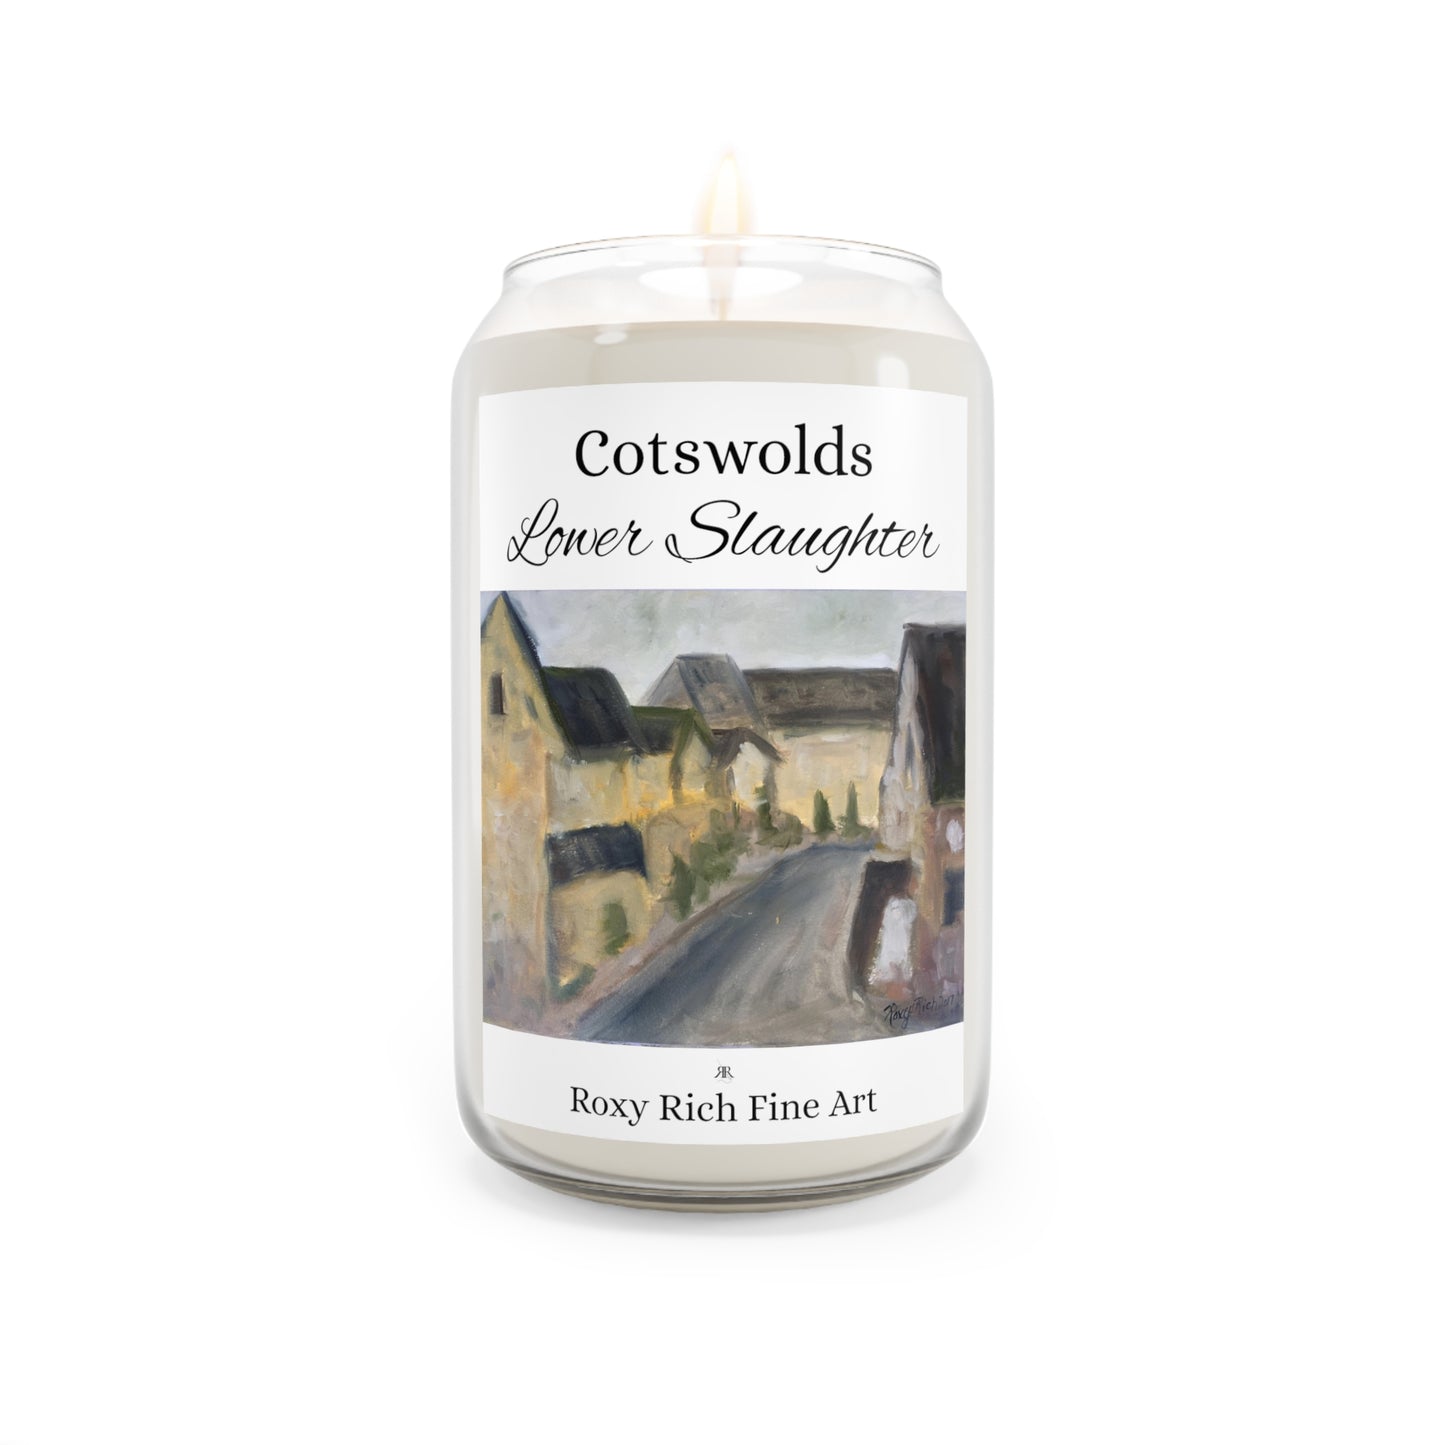 Lower Slaughter Cotswolds Scented Candle, 13.75oz